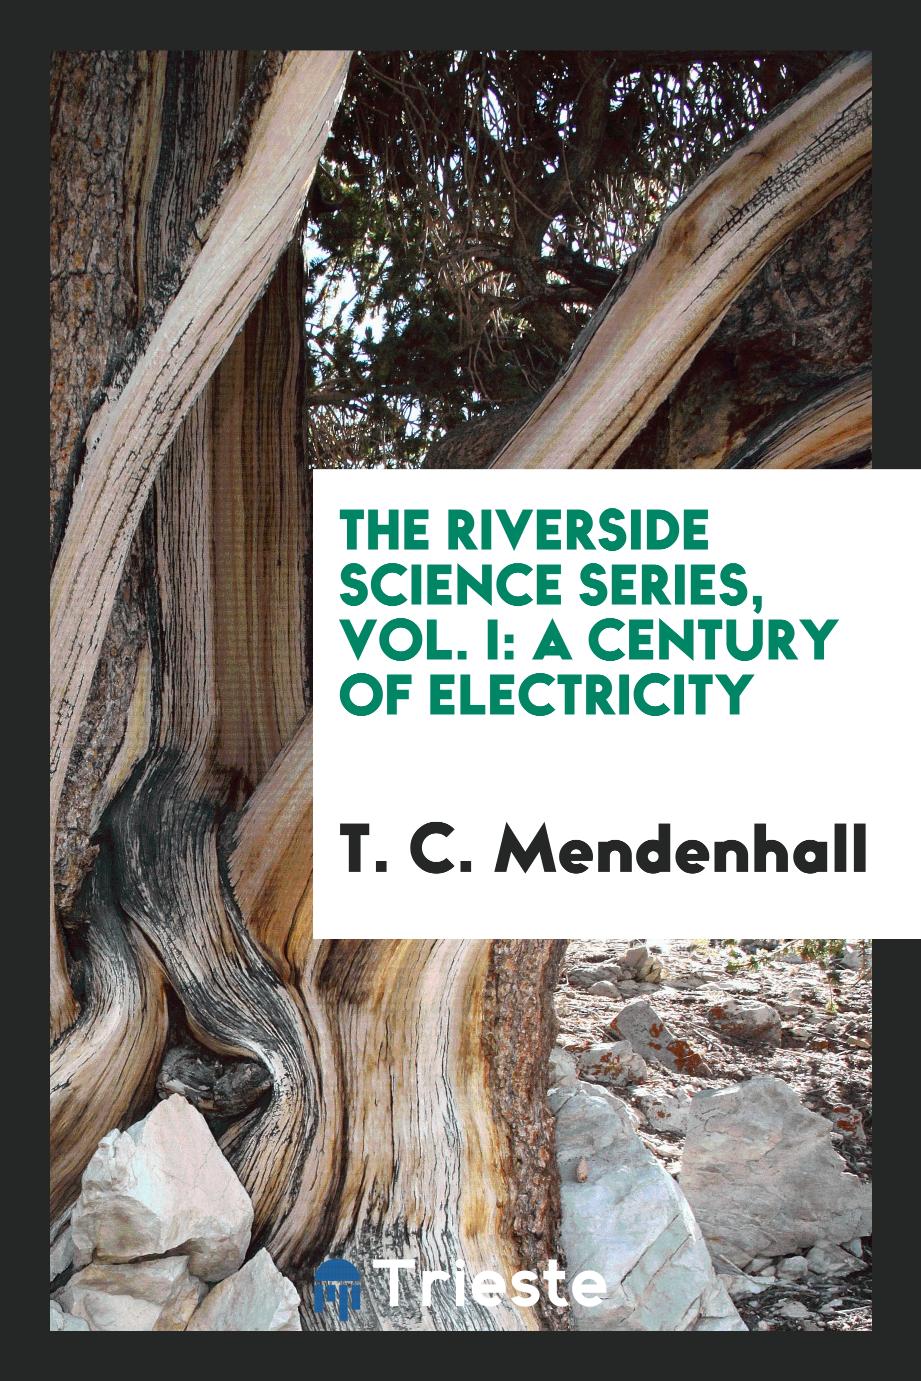 The Riverside Science Series, Vol. I: A Century of Electricity